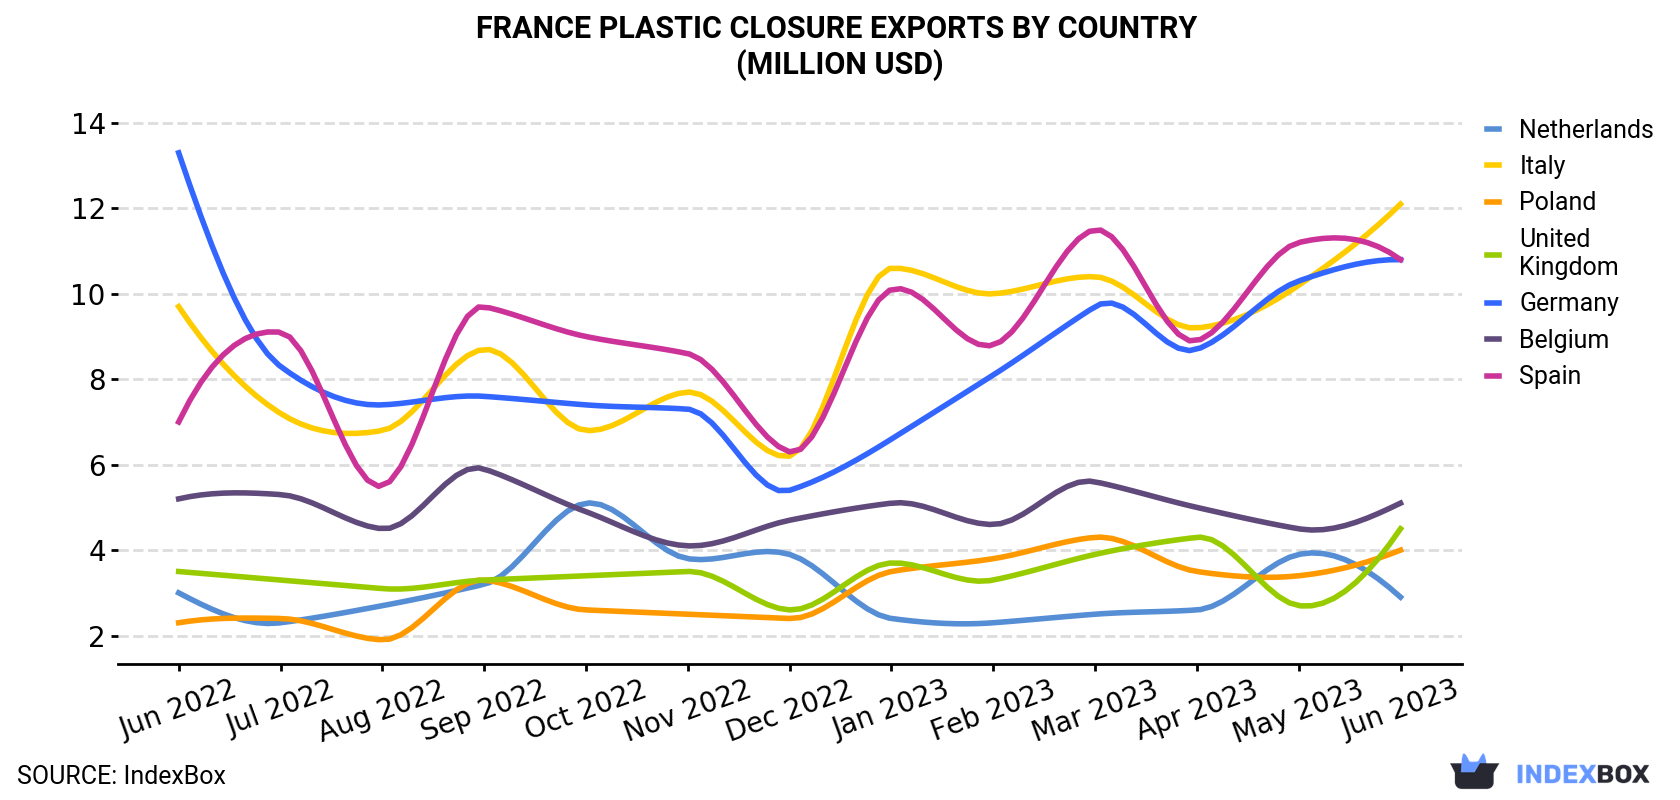 France Plastic Closure Exports By Country (Million USD)